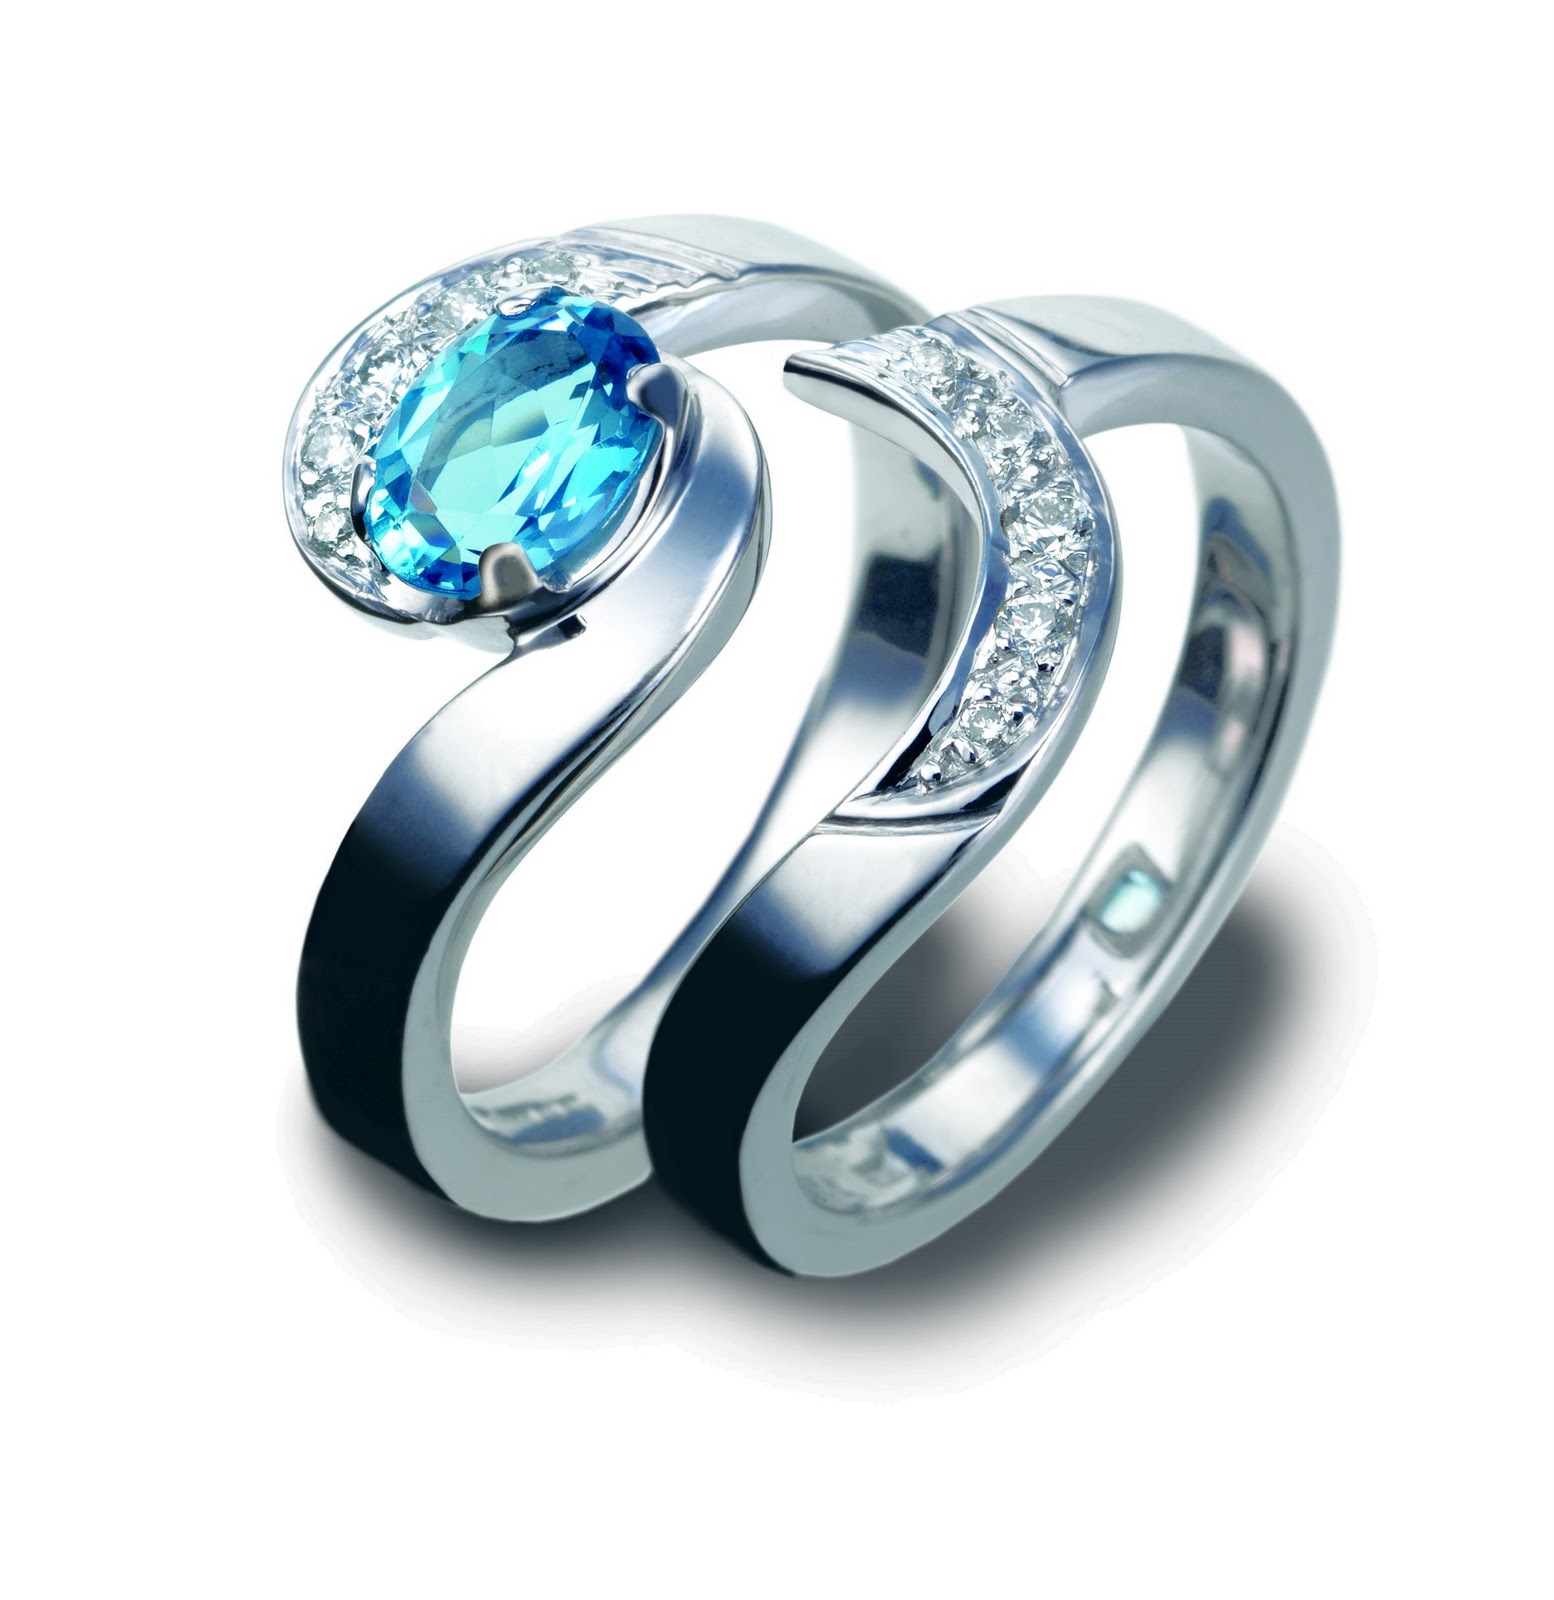 Beautiful wedding Rings Pictures | Diamond,Gold,Silver,Platinum Rings